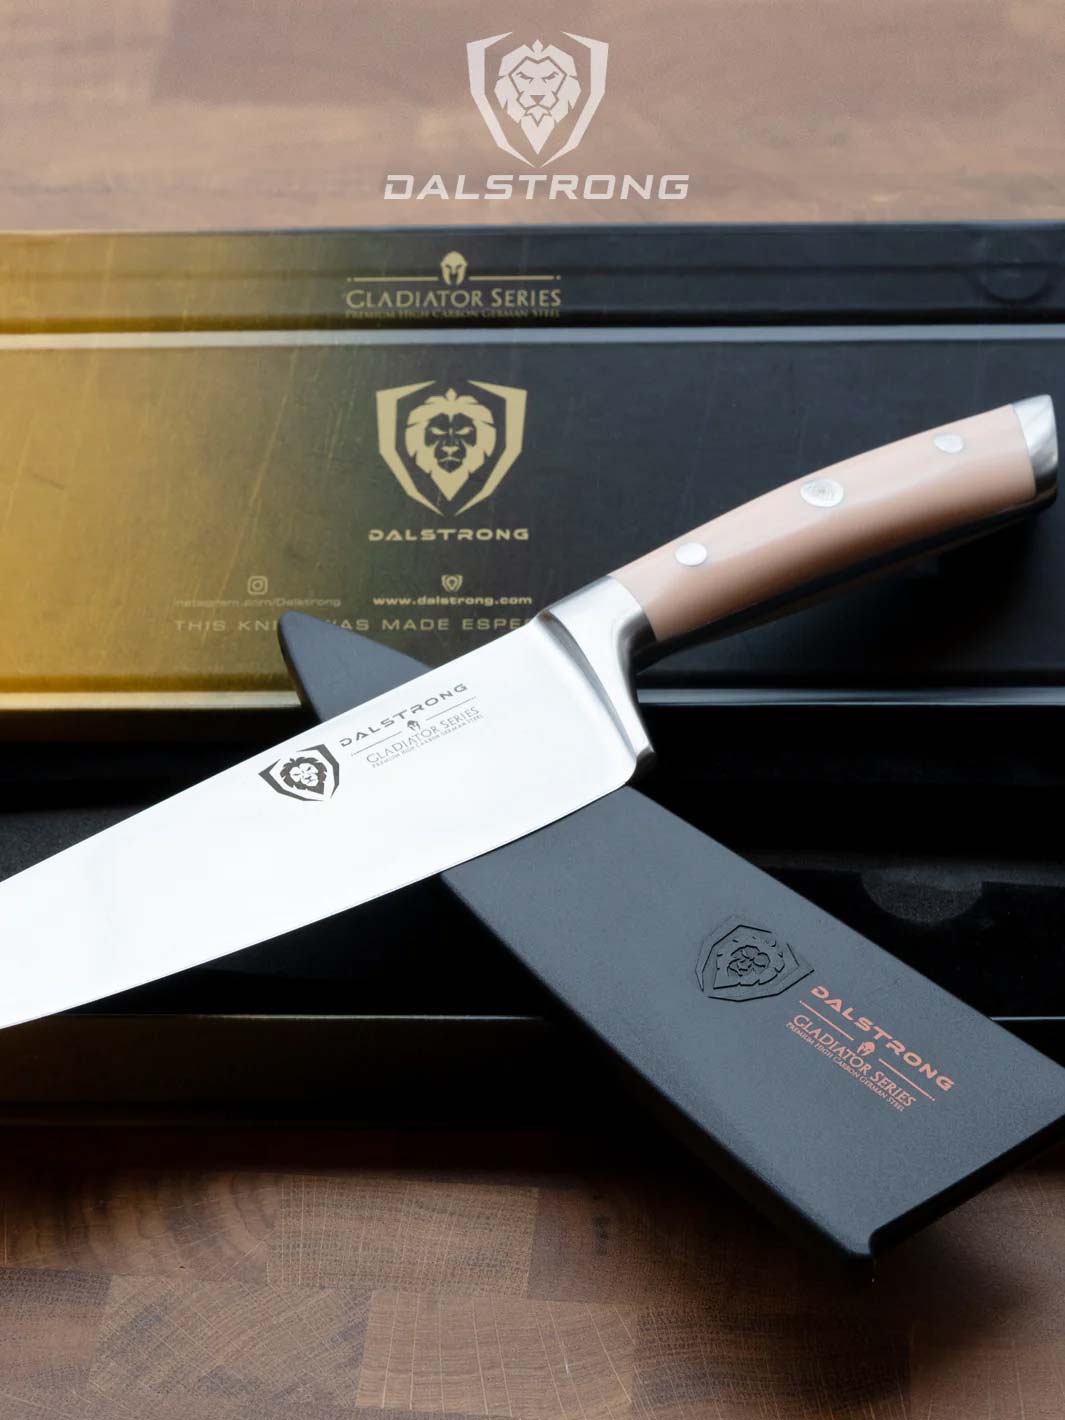 Dalstrong gladiator series 8 inch chef knife with peach handle and black sheath on top of it's premium packaging.